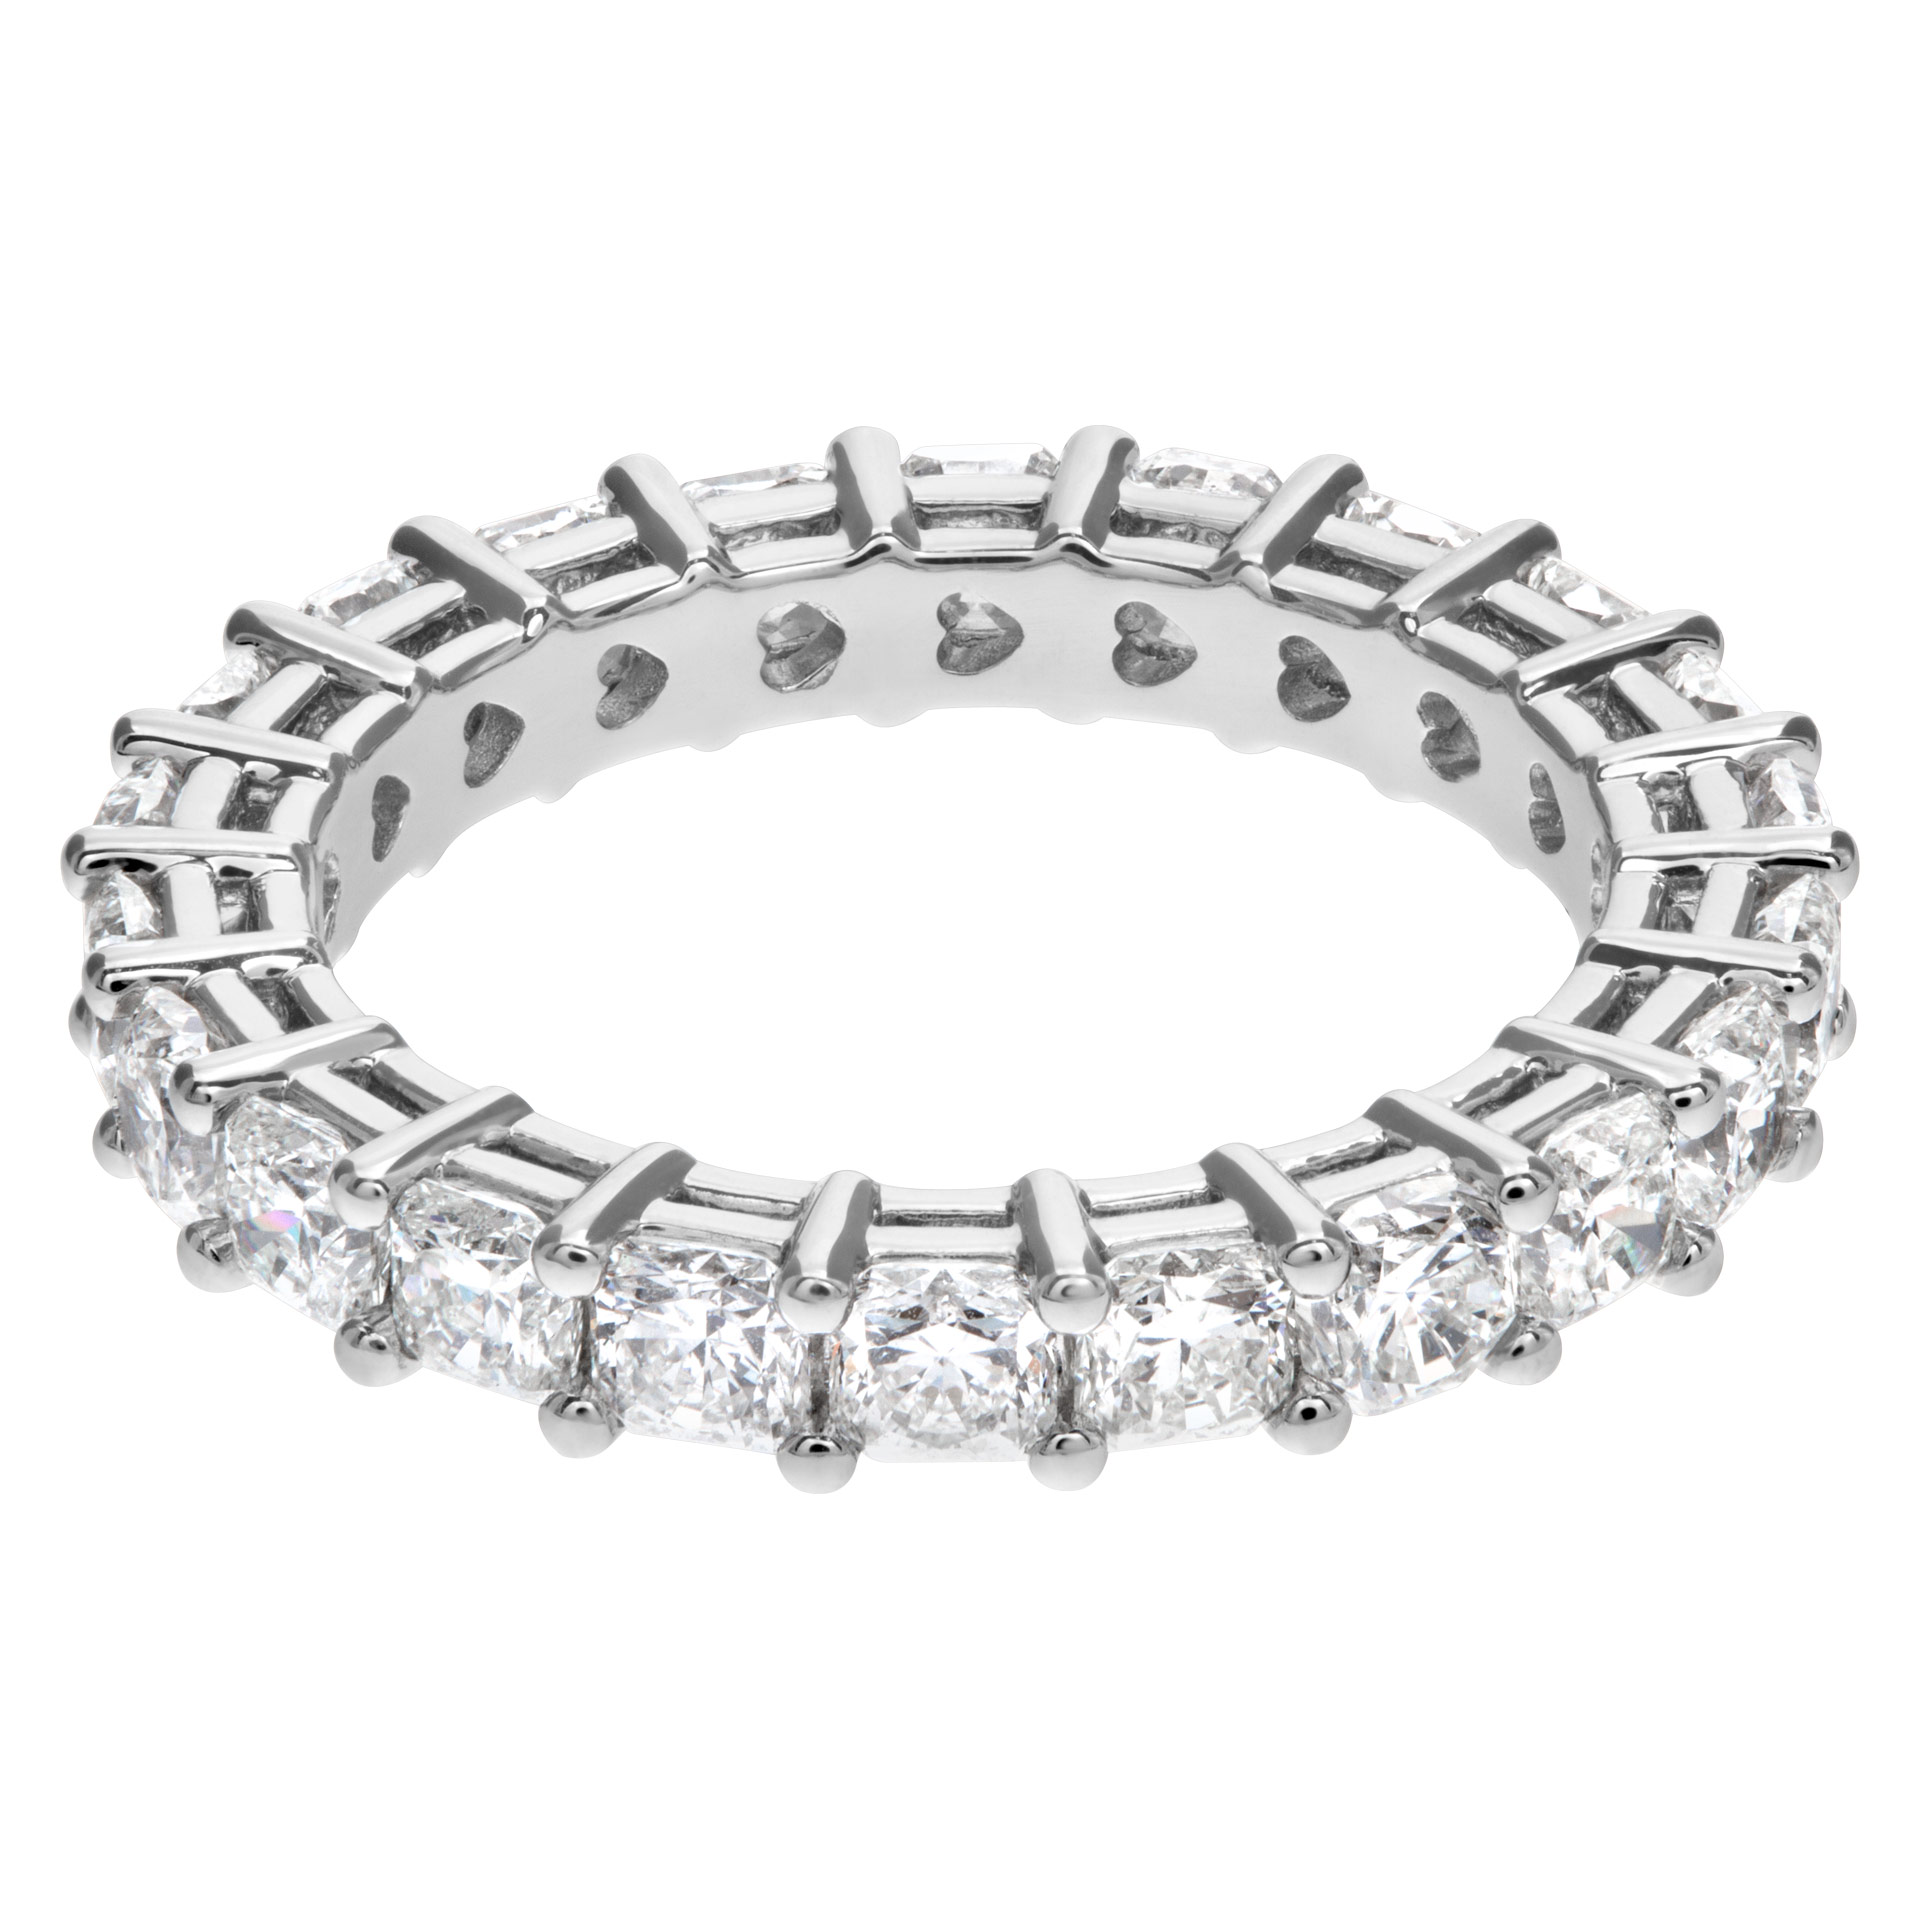 Diamond eternity band with 22 radiant cut diamonds, totaling 3.35 carats set in platinum. image 1